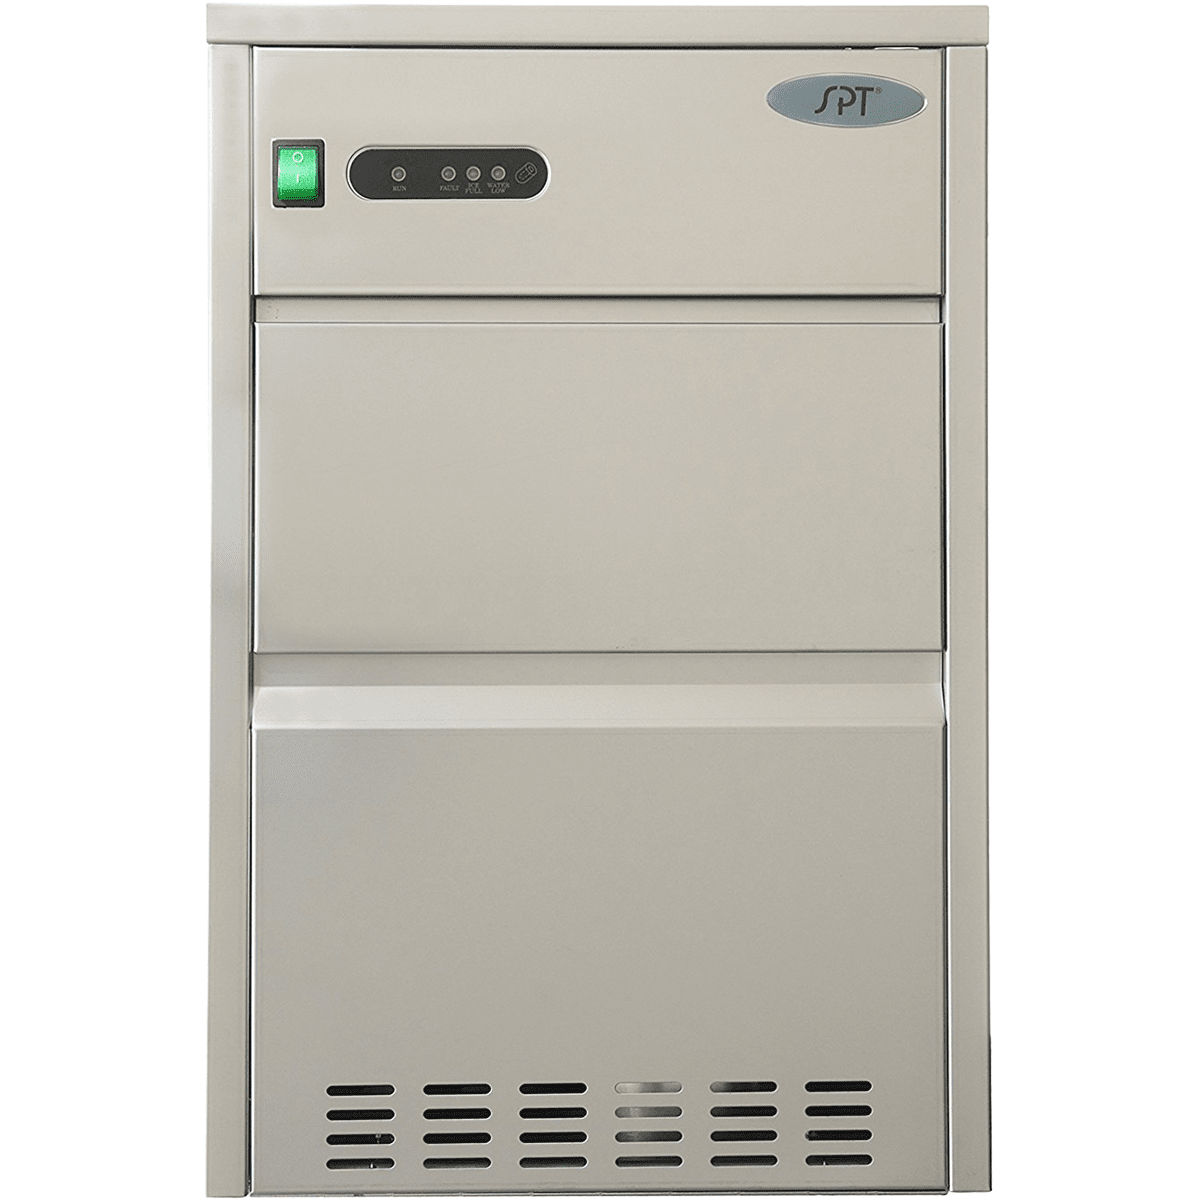 SPT 66 Lb. Automatic Stainless Steel Ice Maker (IM-661C)